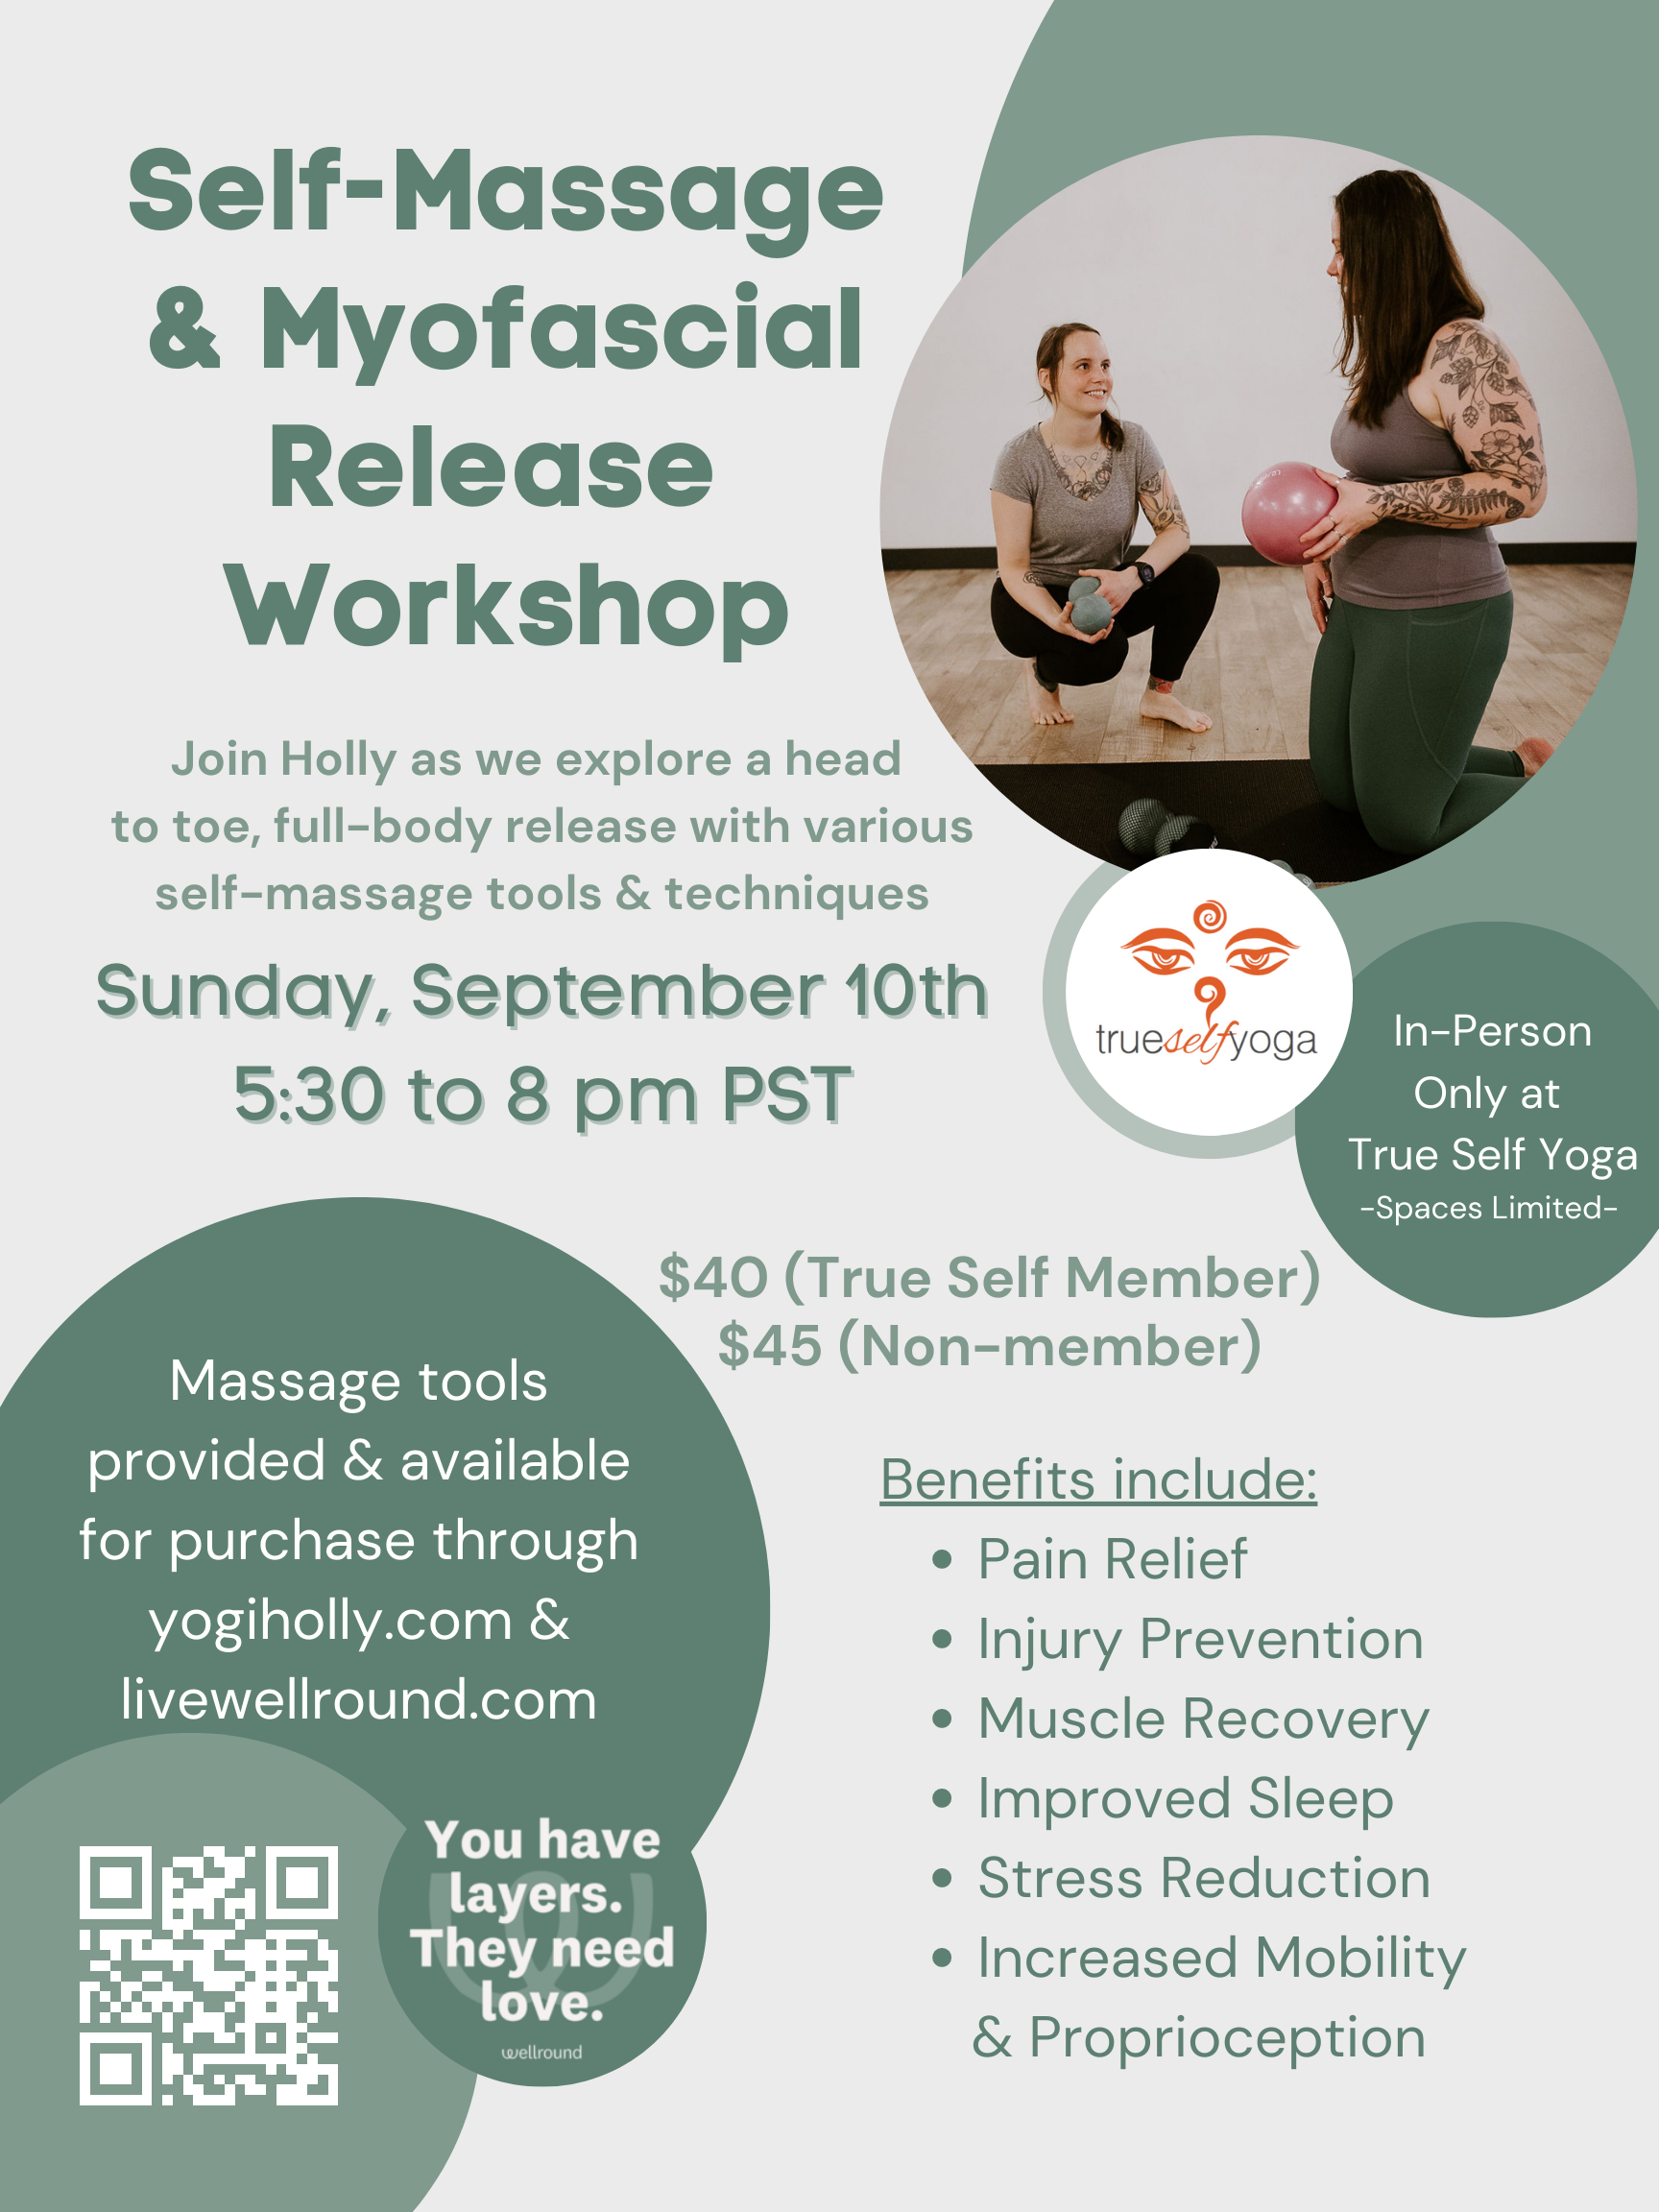 The Benefits of Myofascial Release Massage - Propel Physiotherapy